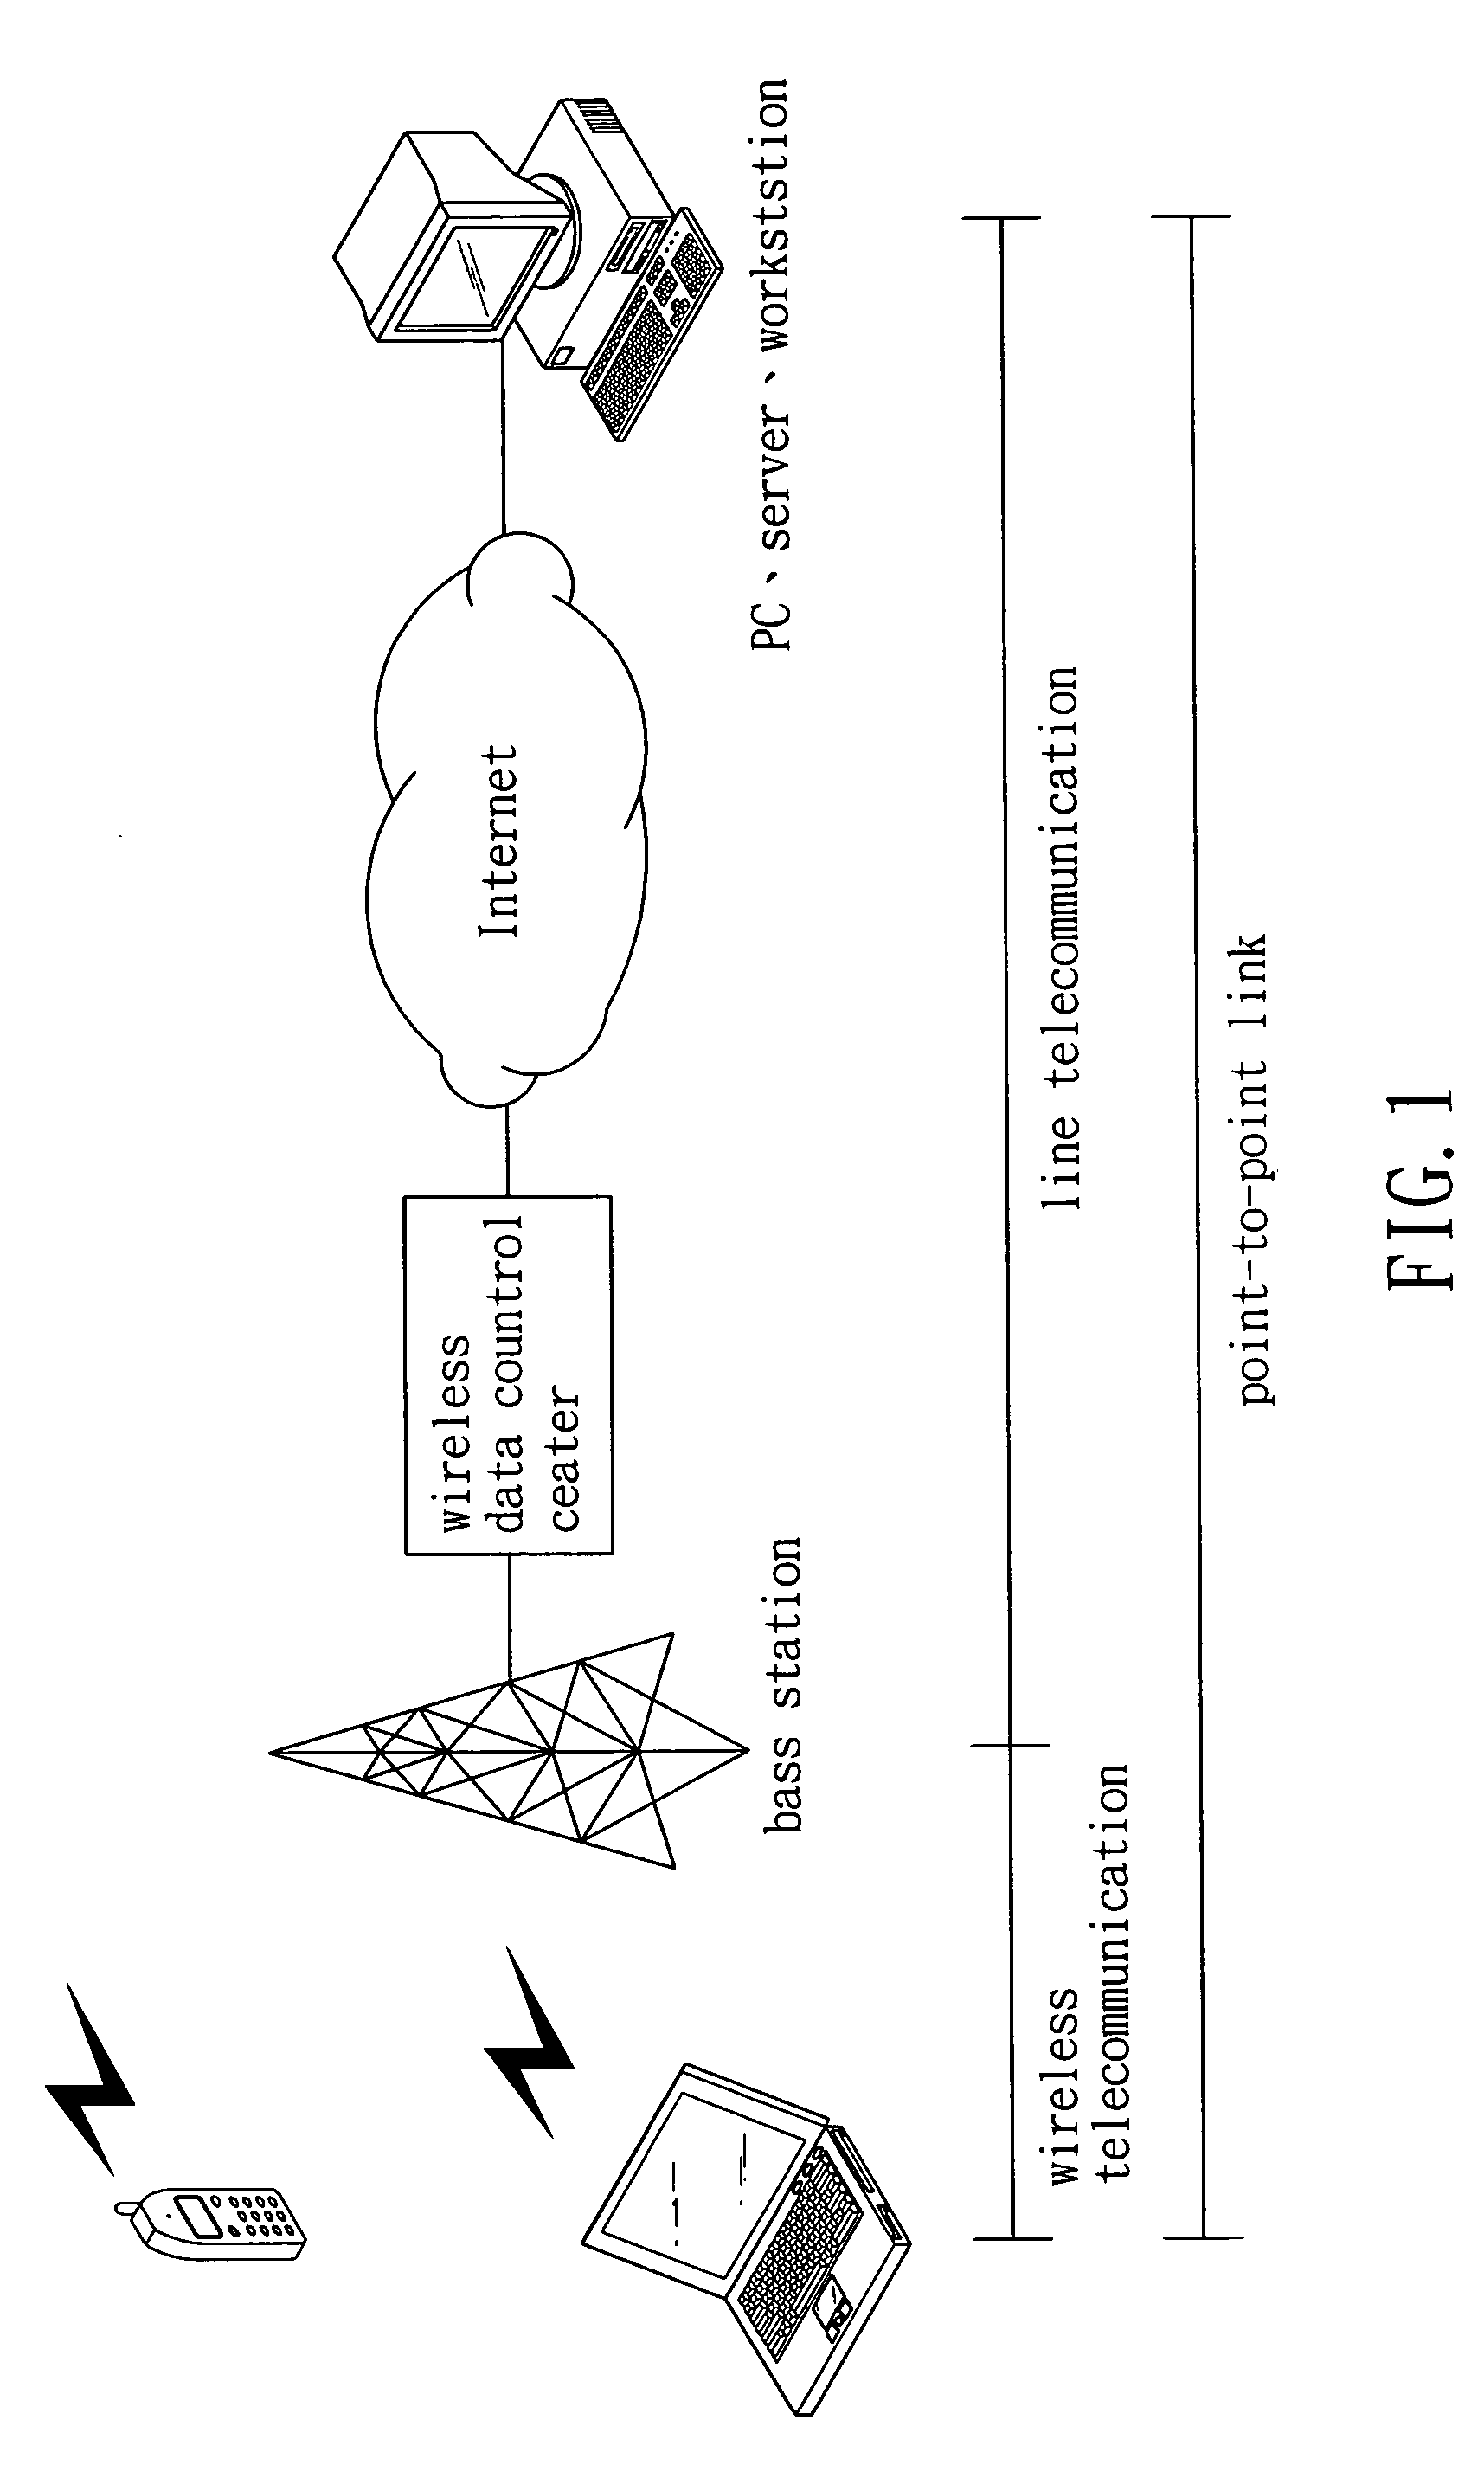 TCP/IP header compression format and method over wireless network